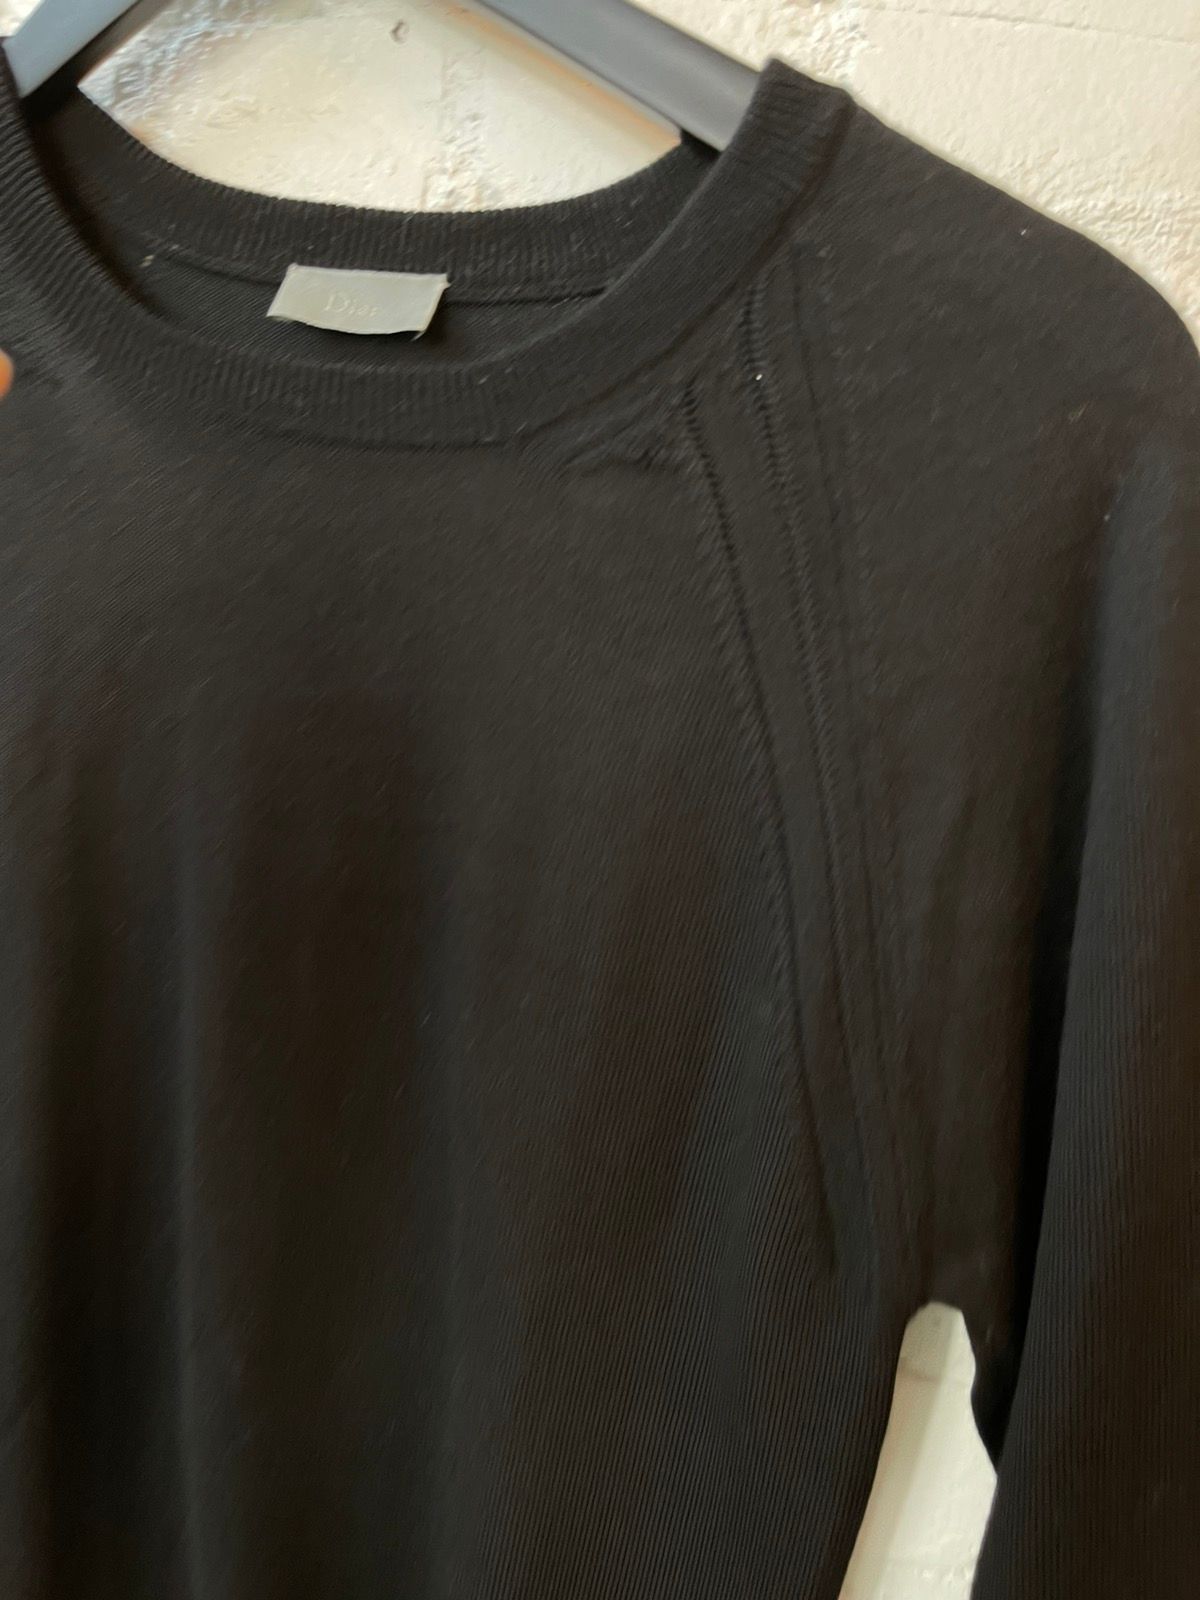 Dior Homme THRASHED Black Knit Wool Sweater Scaring XS-S